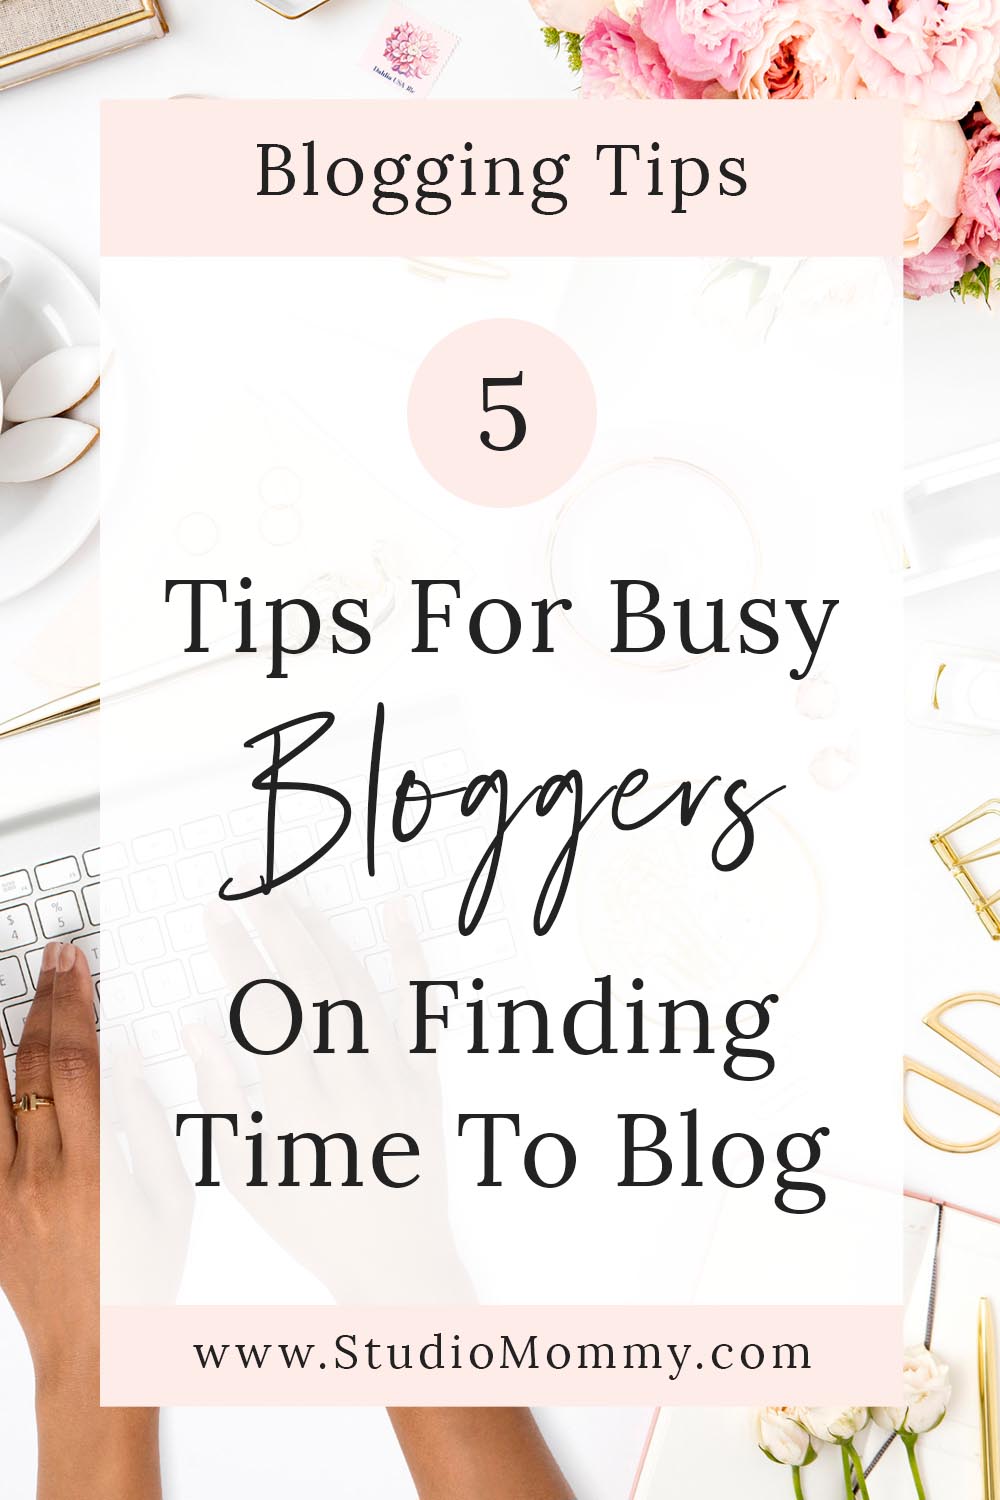 Bloggers struggle with finding time to blog. Life tends to get in the way of things and before you know it, it’s been a month since you last sat down to blog. It is hard to find the time and patience to blog. Whether you are a stay at home mom or a ‘just for fun’ blogger, here are some tips to get you back to blogging. #blog #blogger #blogposts @studiomommy